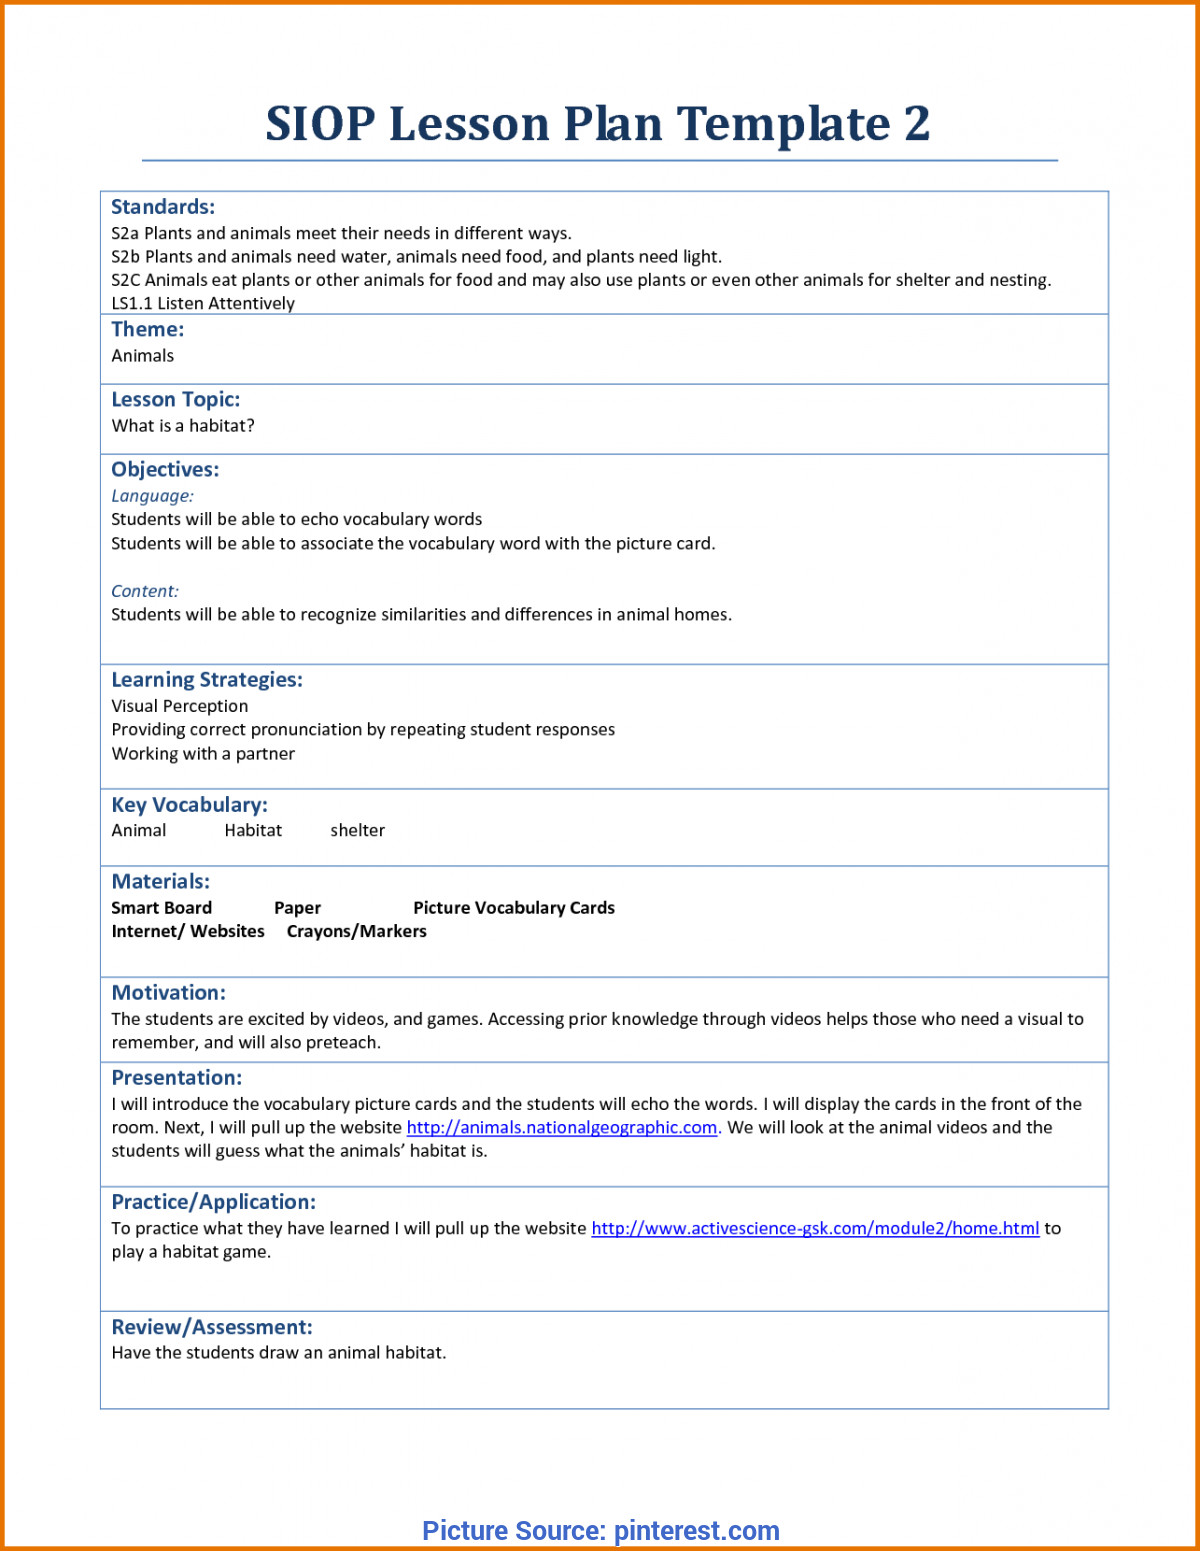 Siop Lesson Plan Fresh Siop Lesson Plan Template 3 Example Siop Lesson Plan